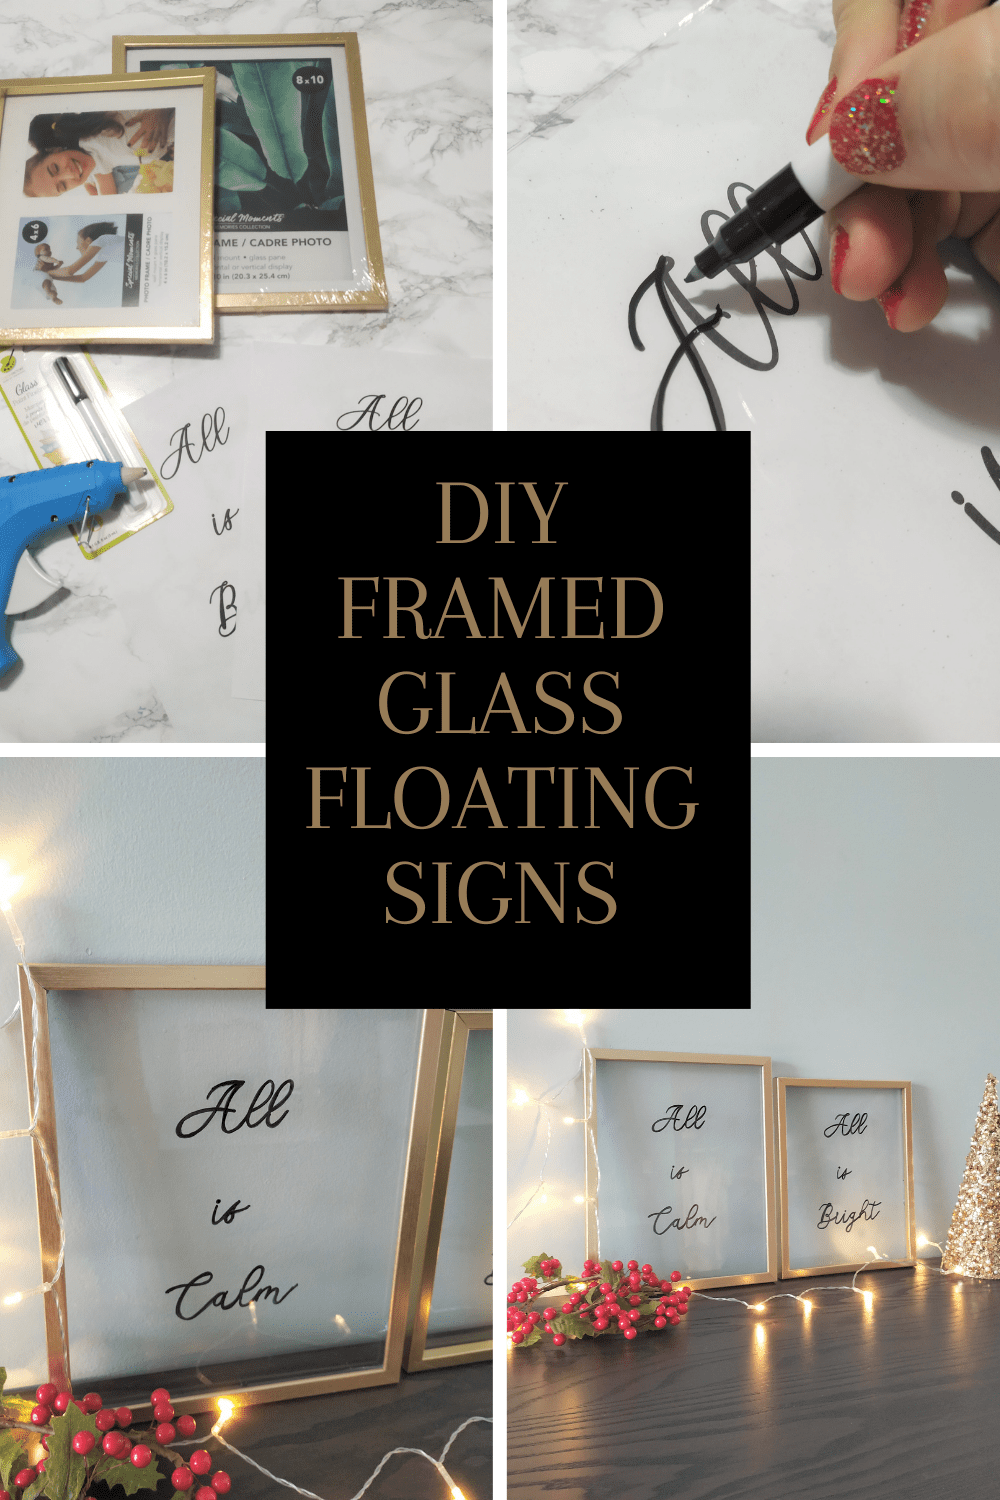 Collage showing how to make framed glass floating signs with text overlay.